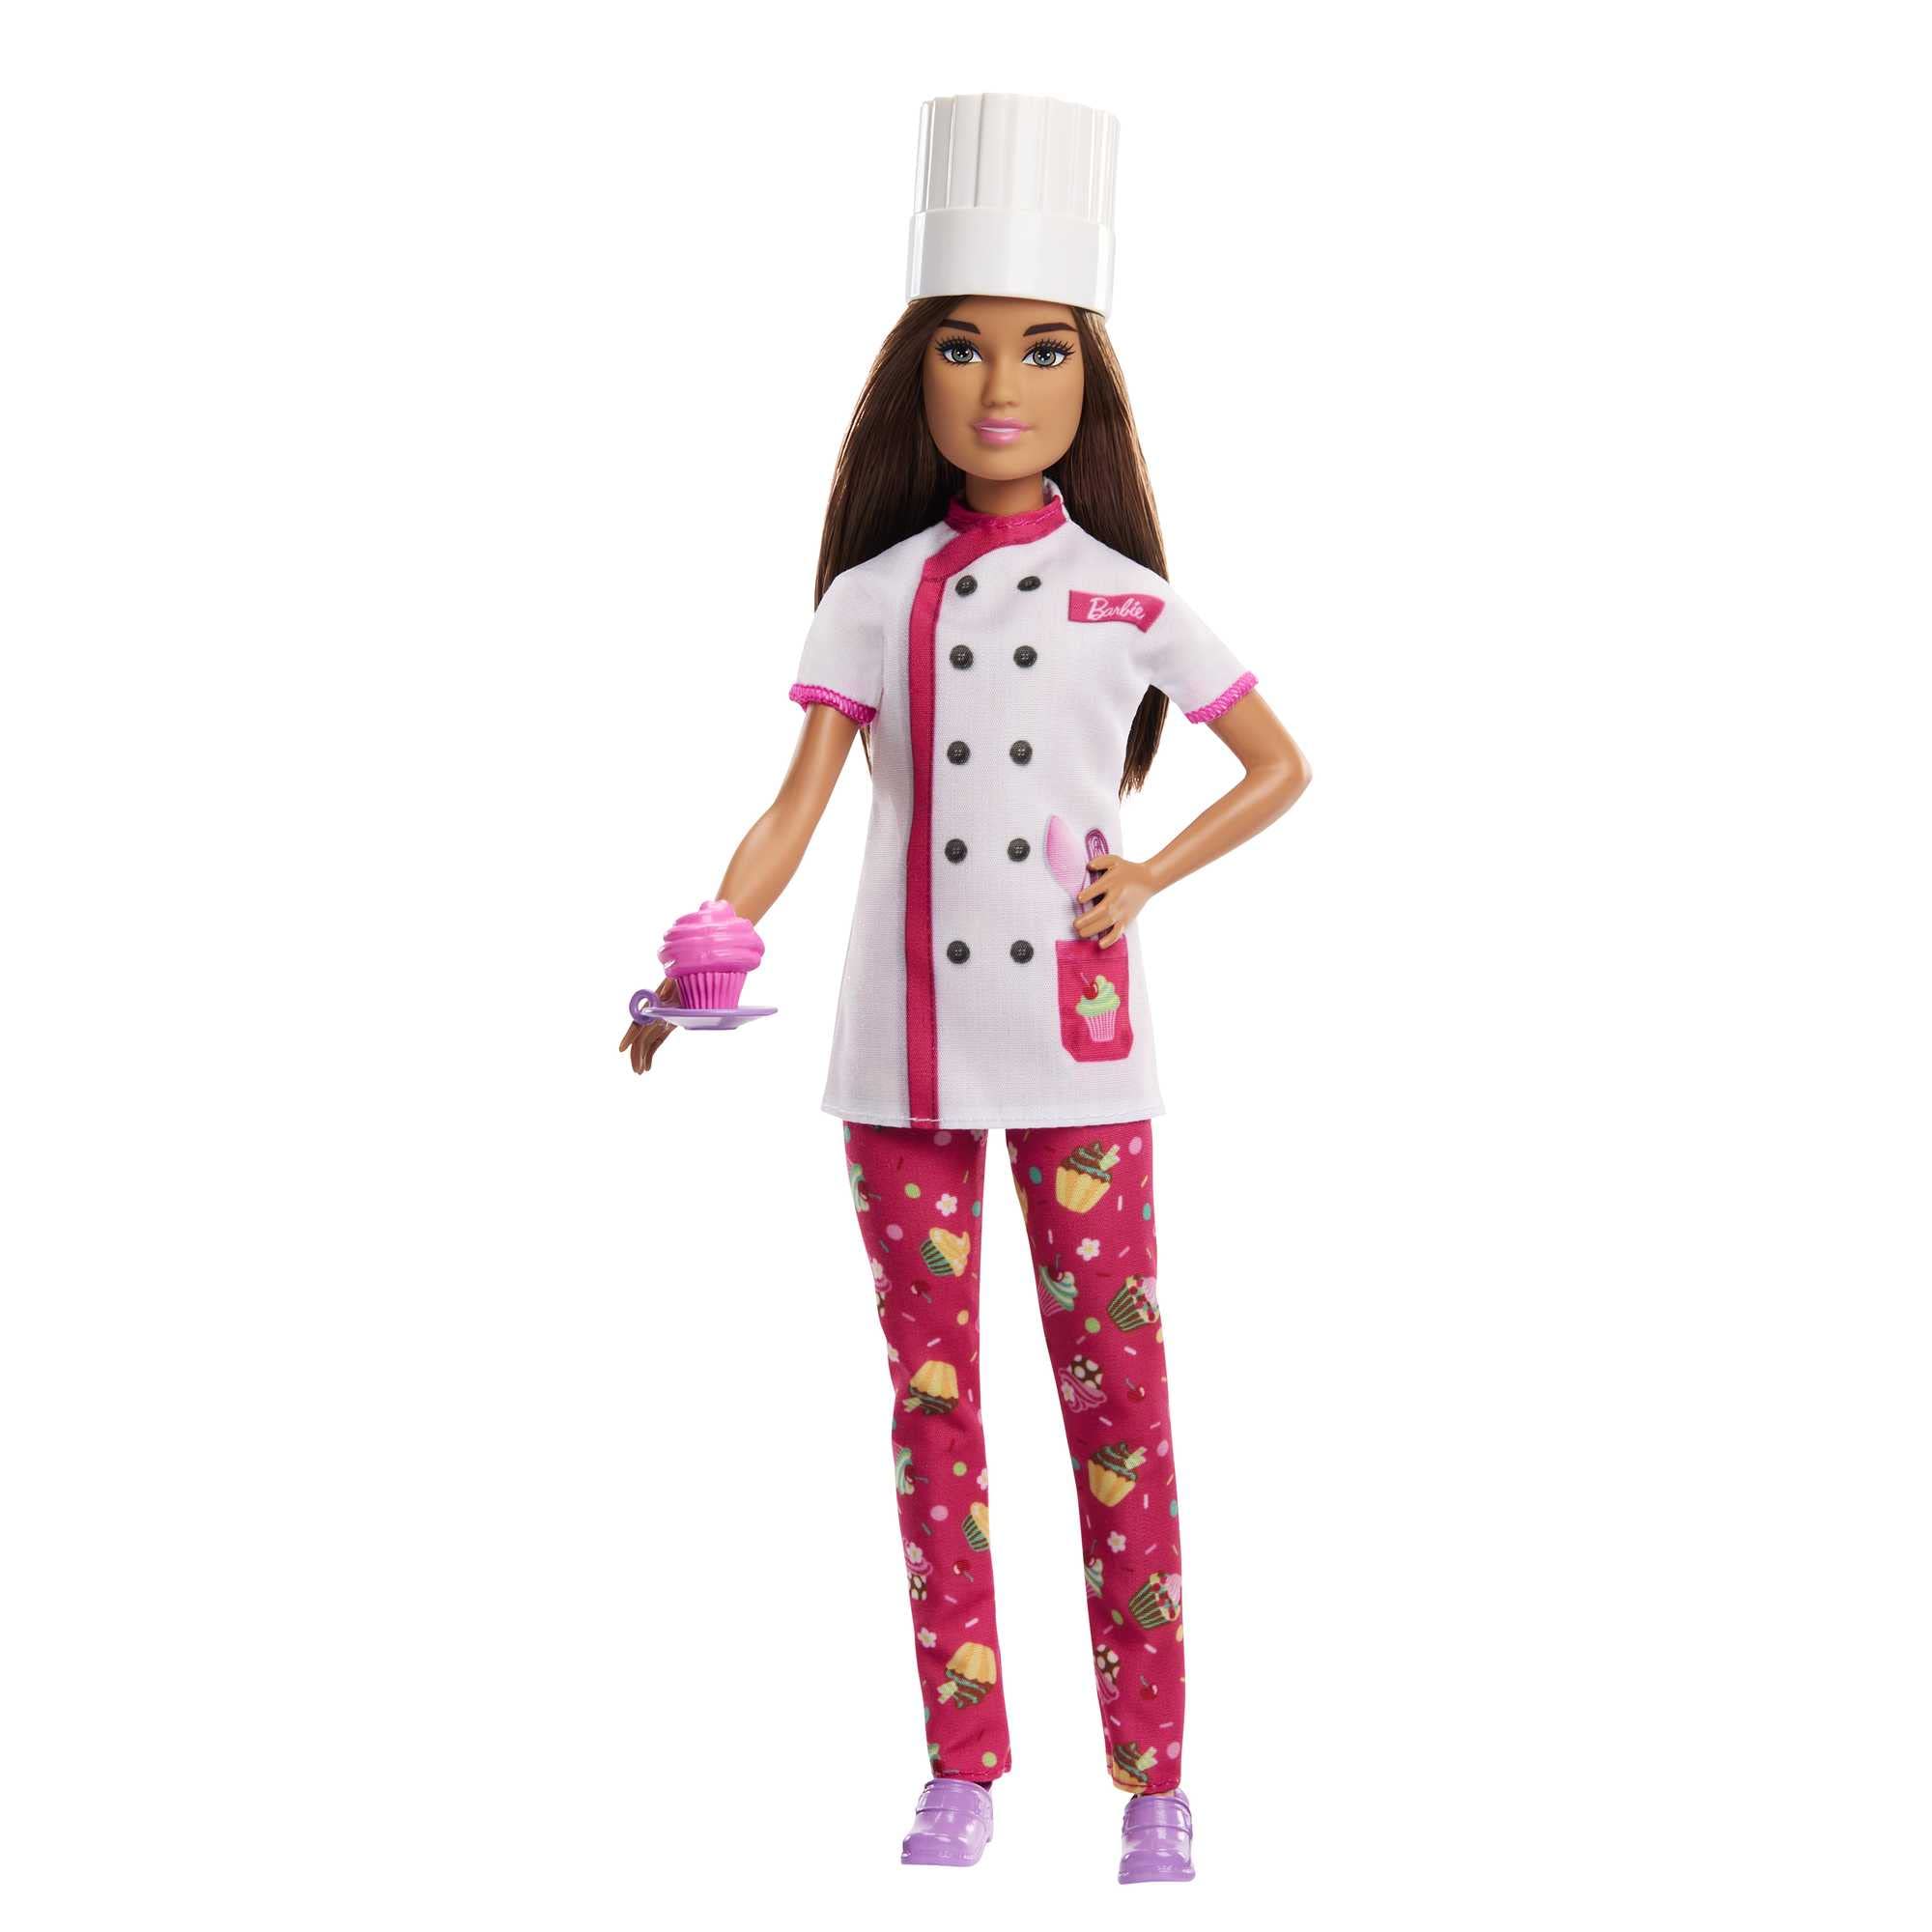 Barbie Doll & Accessories, Career Pastry Chef Doll with Hat, and Cake Slice